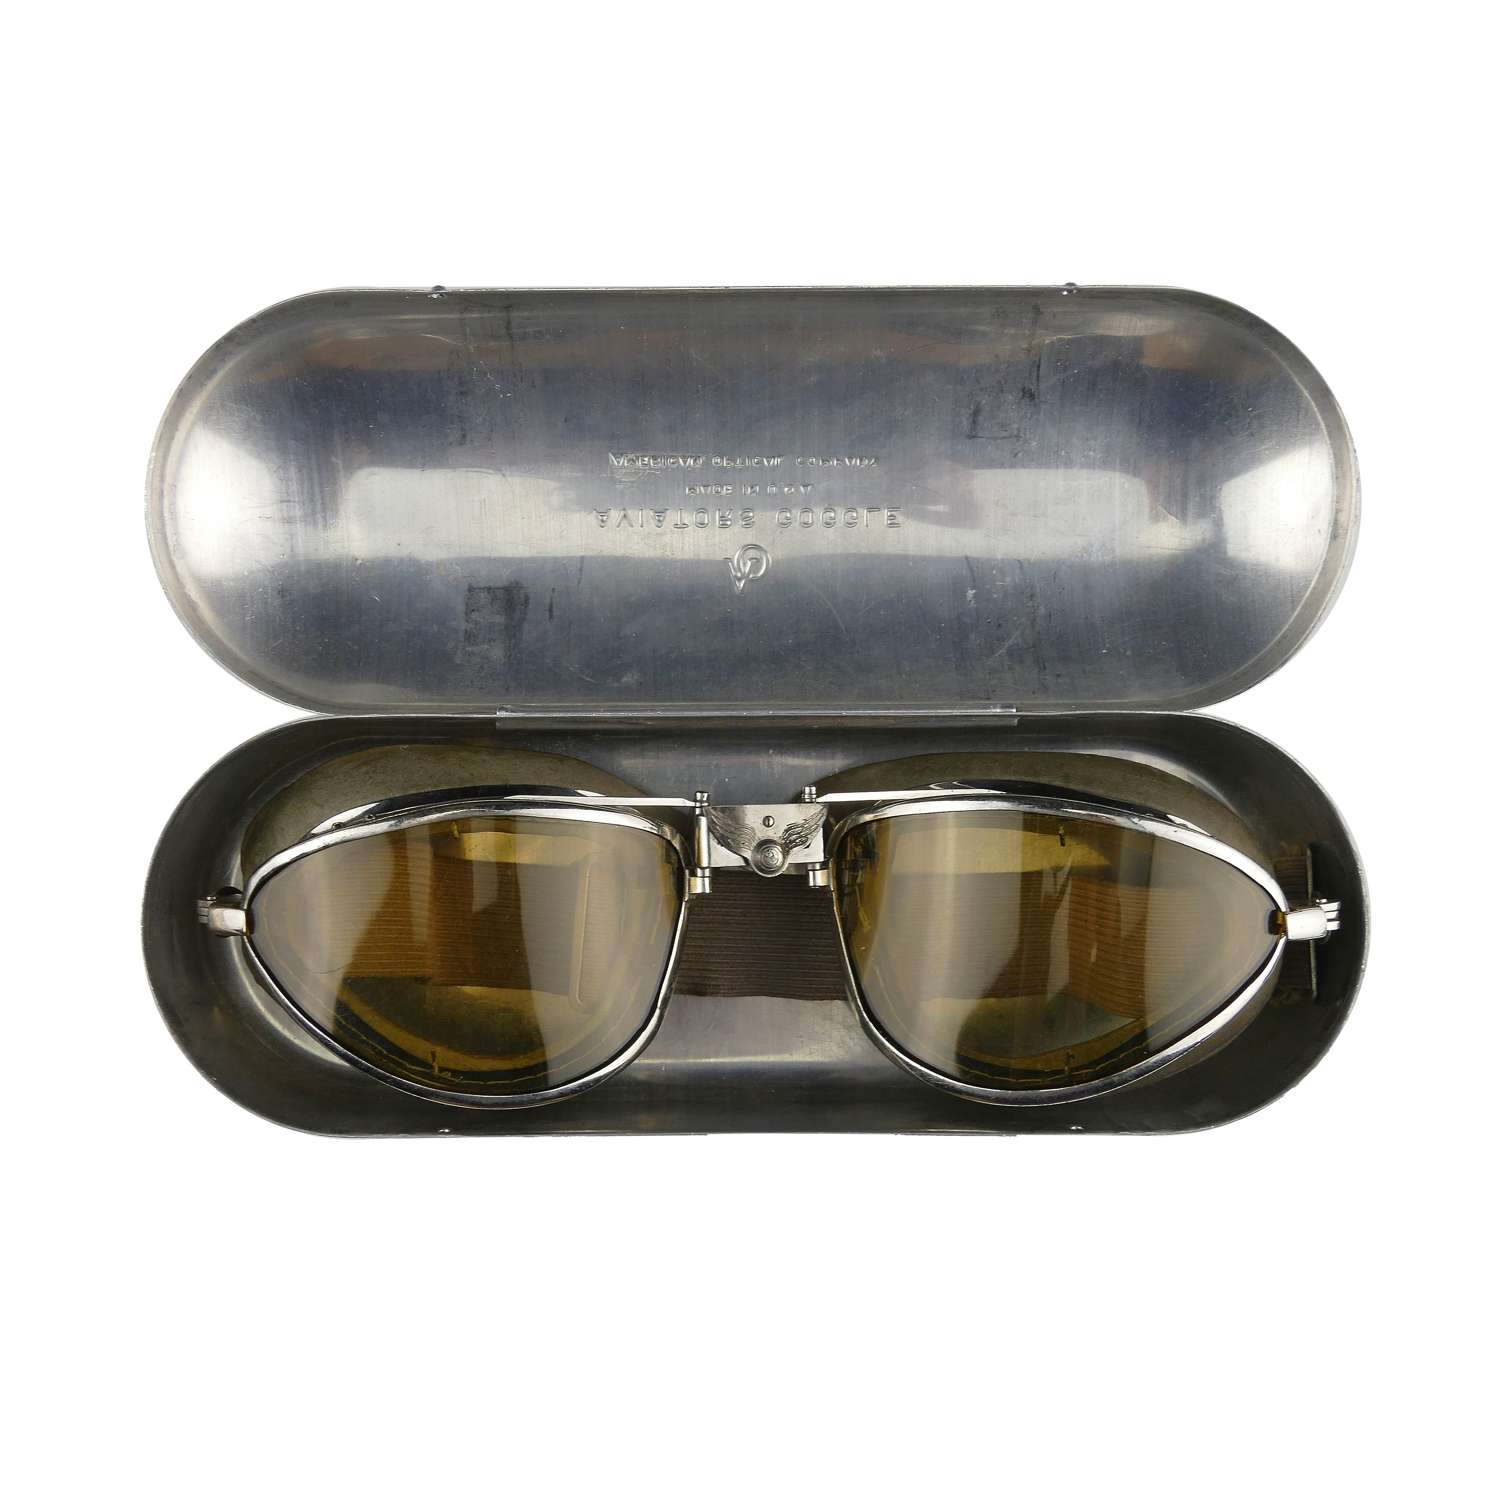 USAAF 'used' American Optical 'Transport' goggles, cased